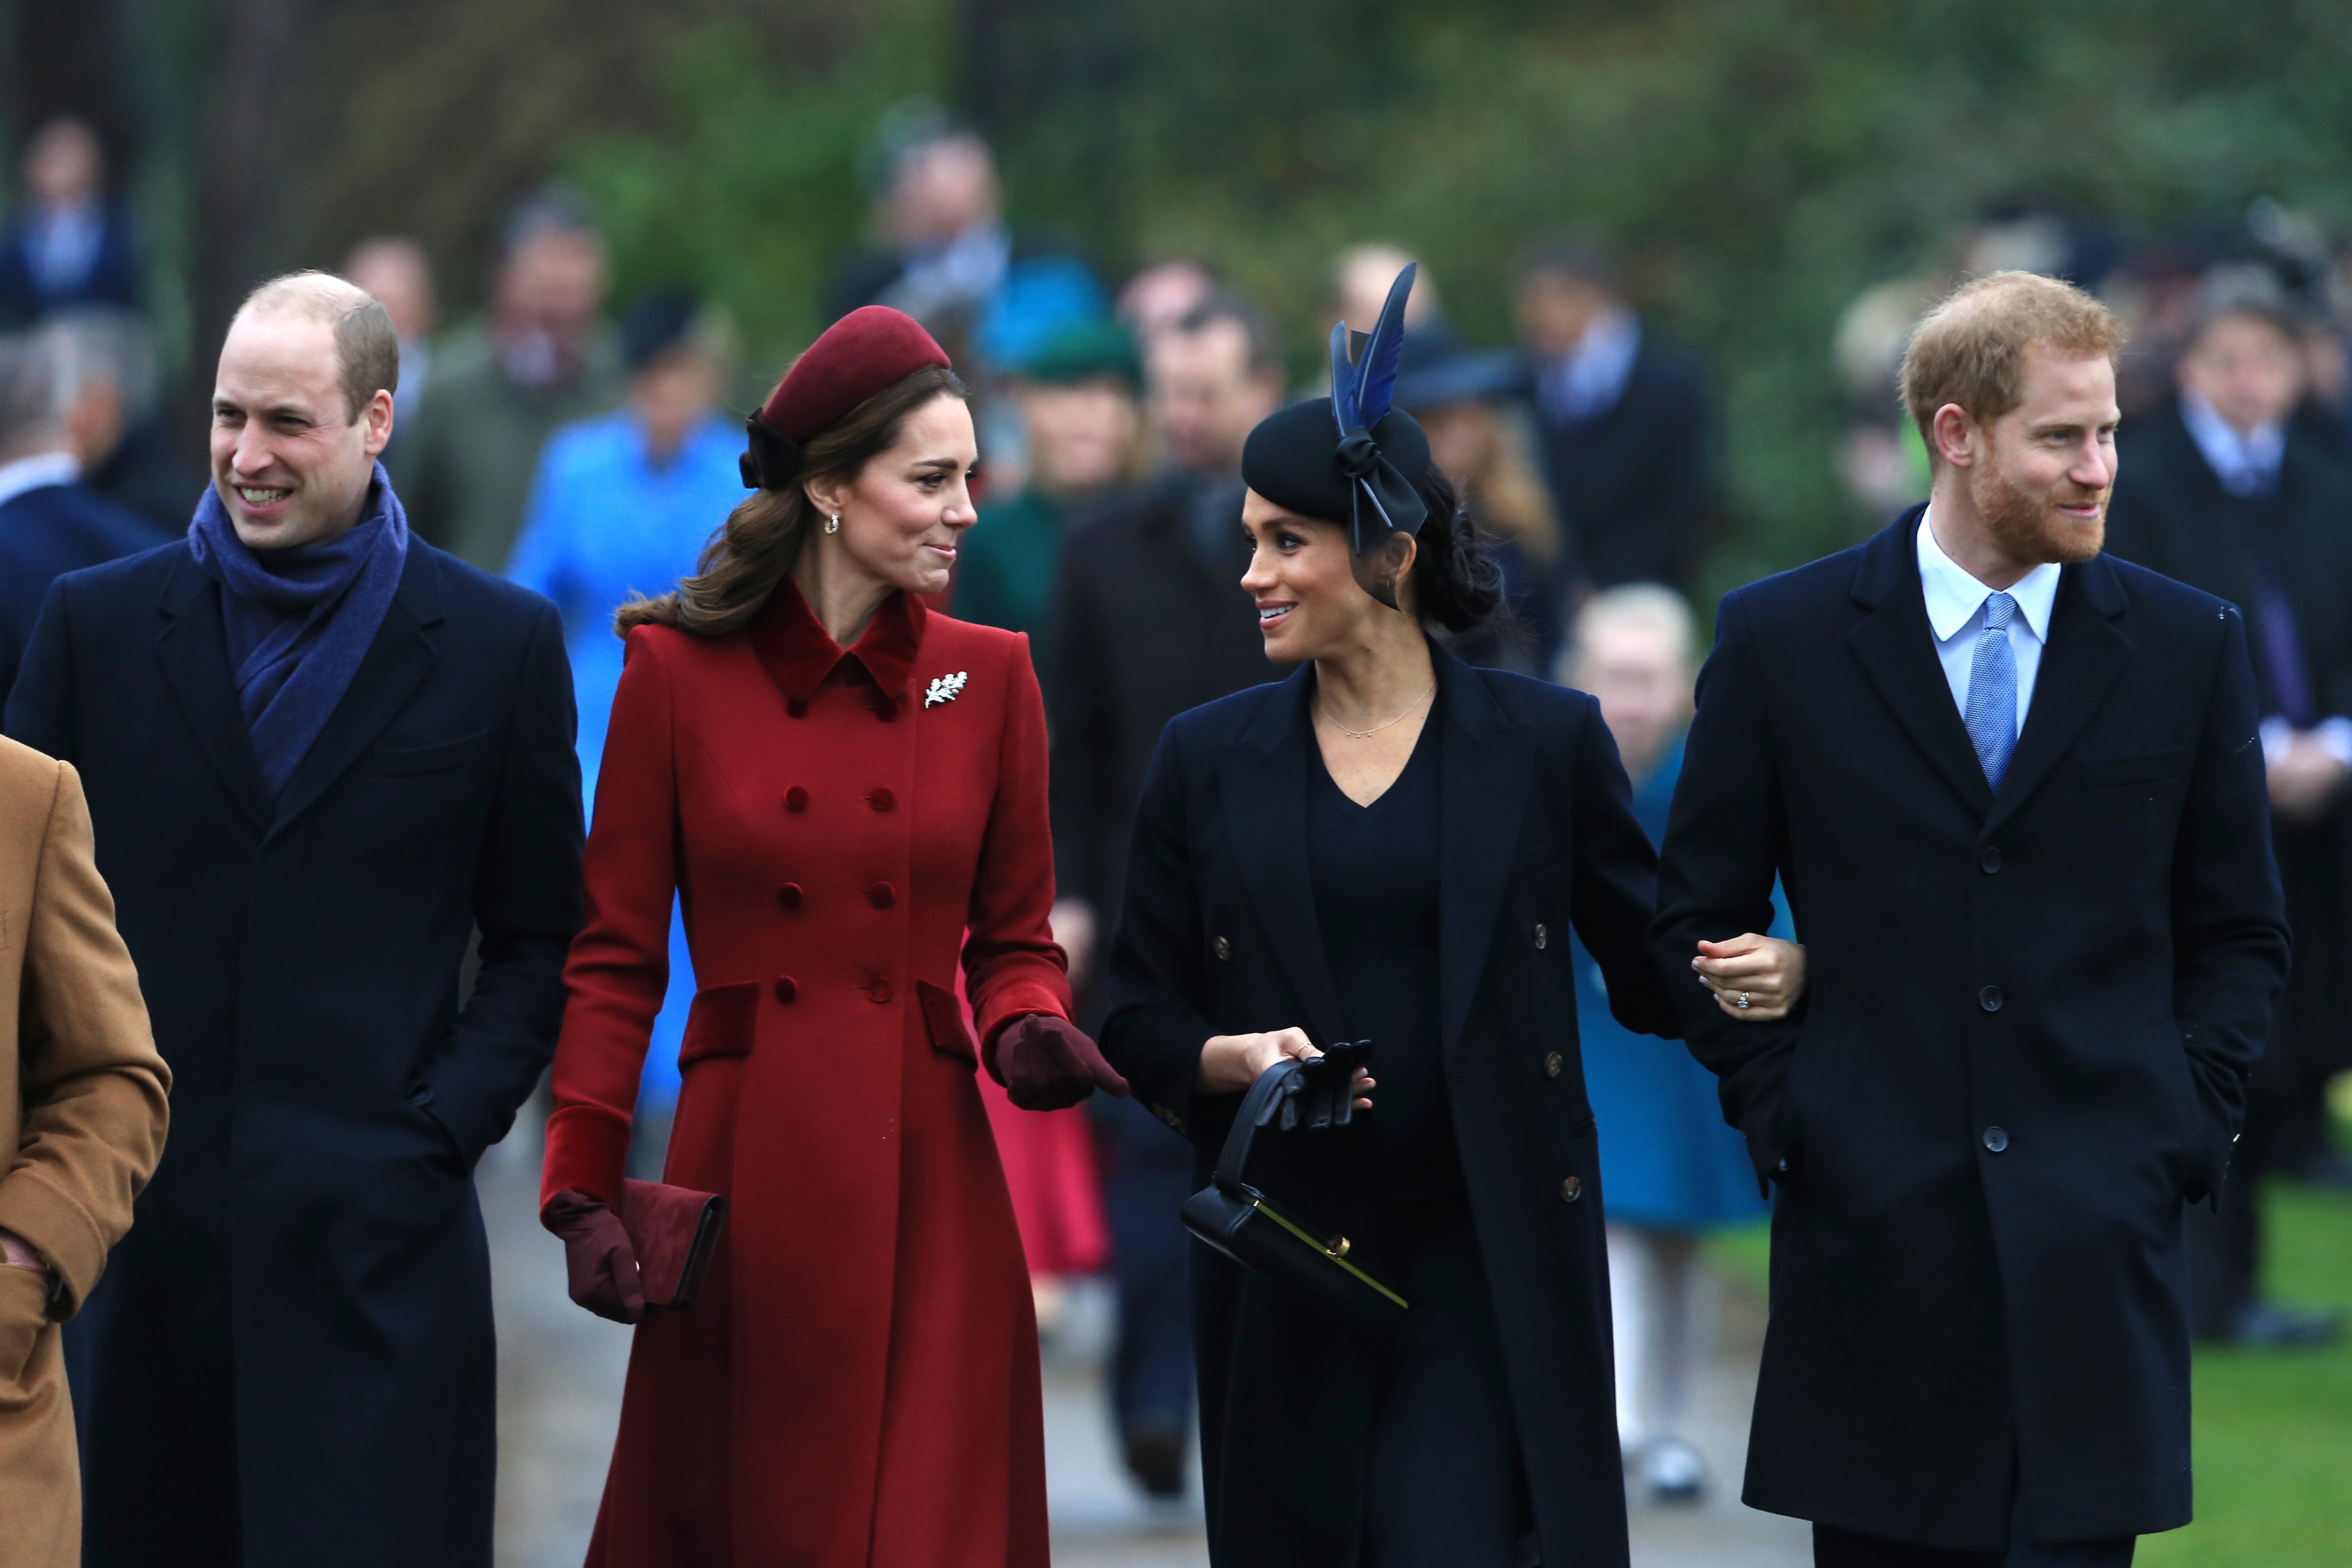 Prince William, Kate Middleton, Meghan Markle and Prince Harry arrive to attend Christmas Day Church service at Church of St Mary Magdalene on the Sandringham estate on December 25, 2018 in King's Lynn, England | Photo: Getty Images